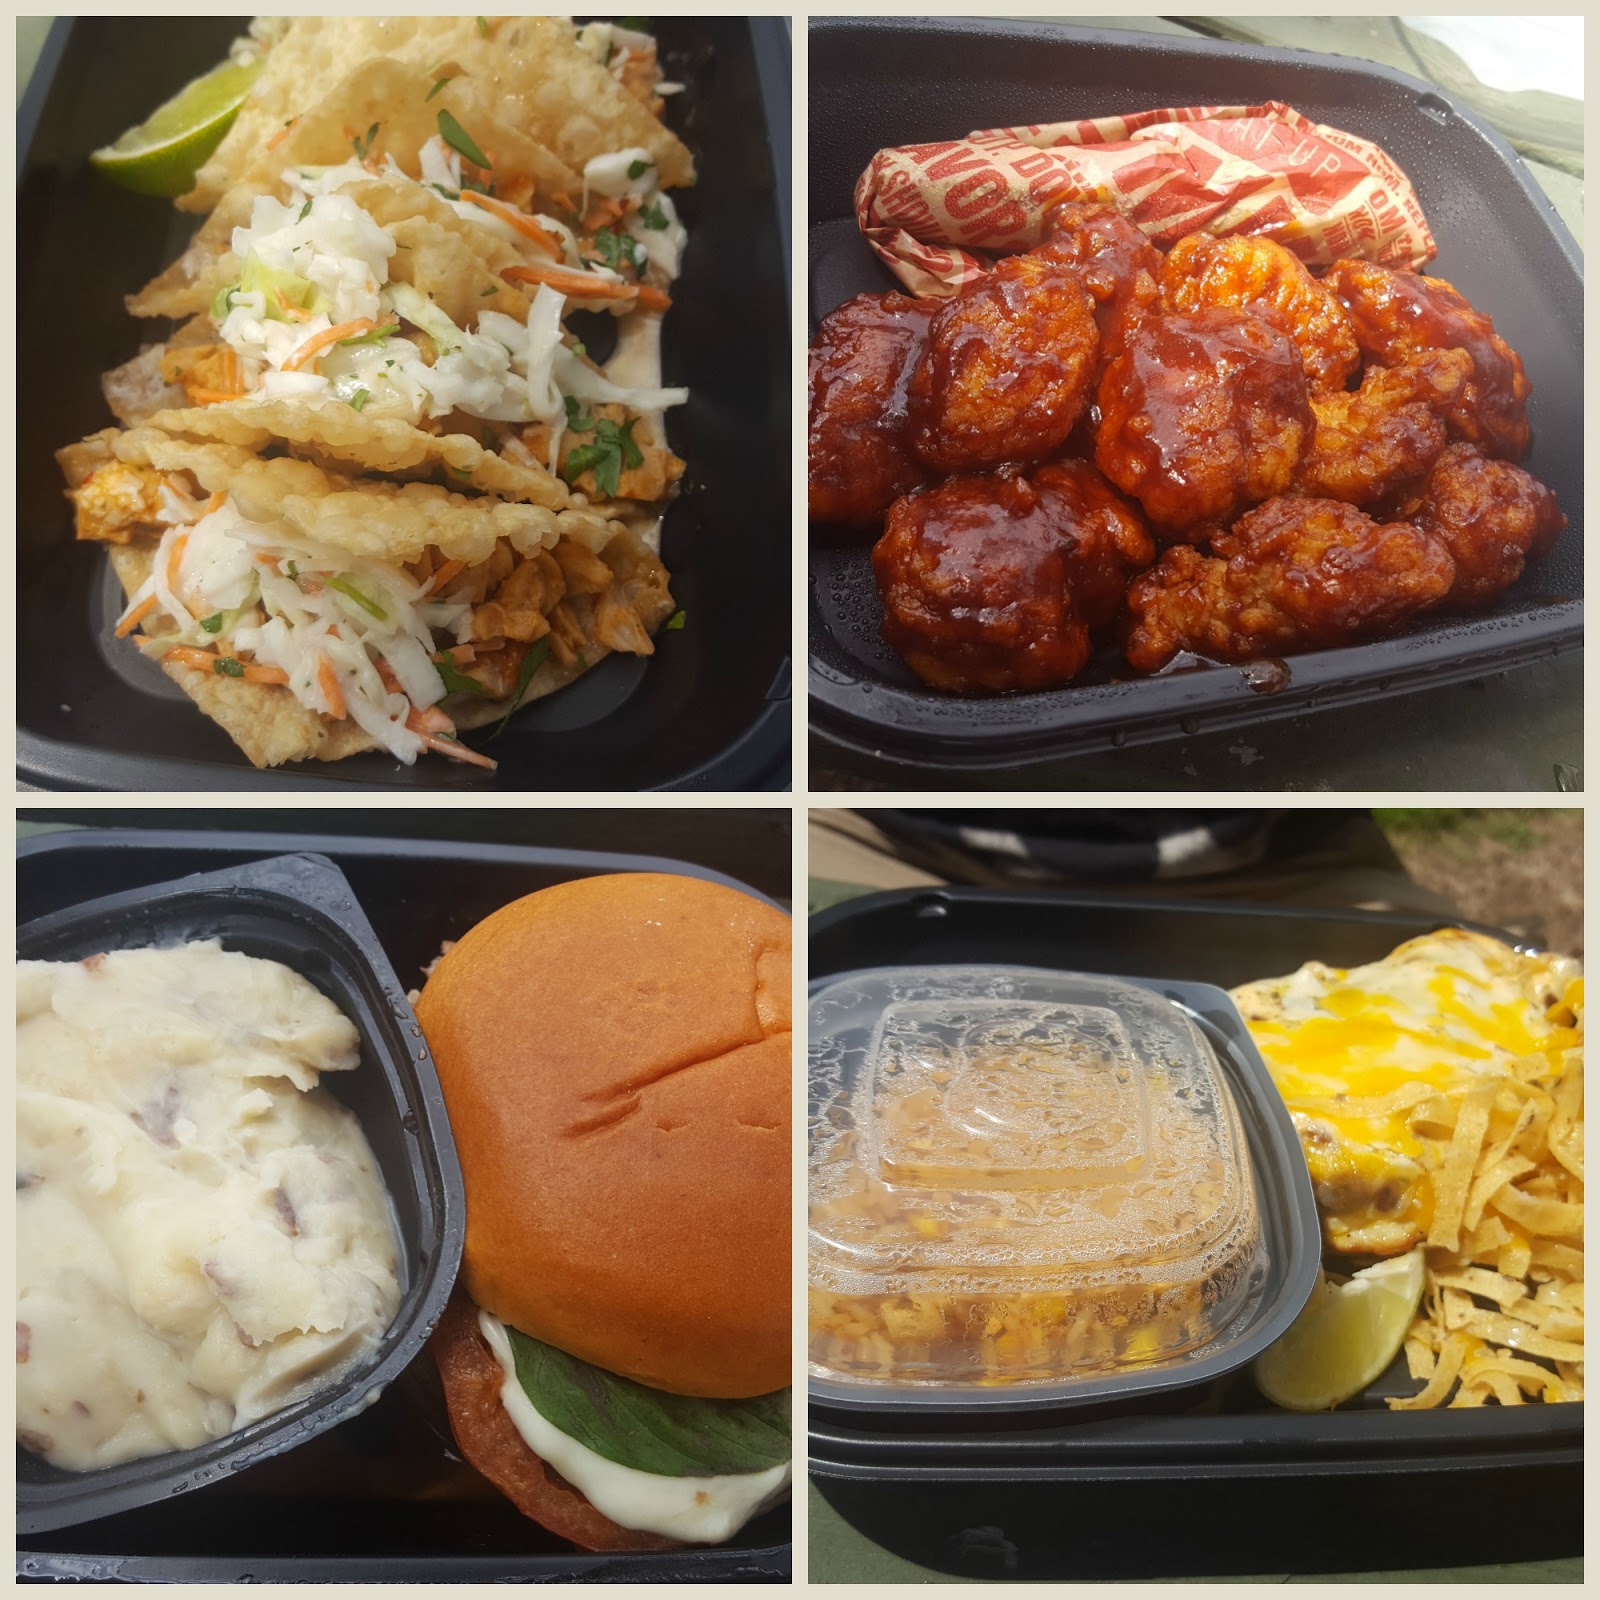 Applebee's Carside To Go {plus a $25 giveaway!} 